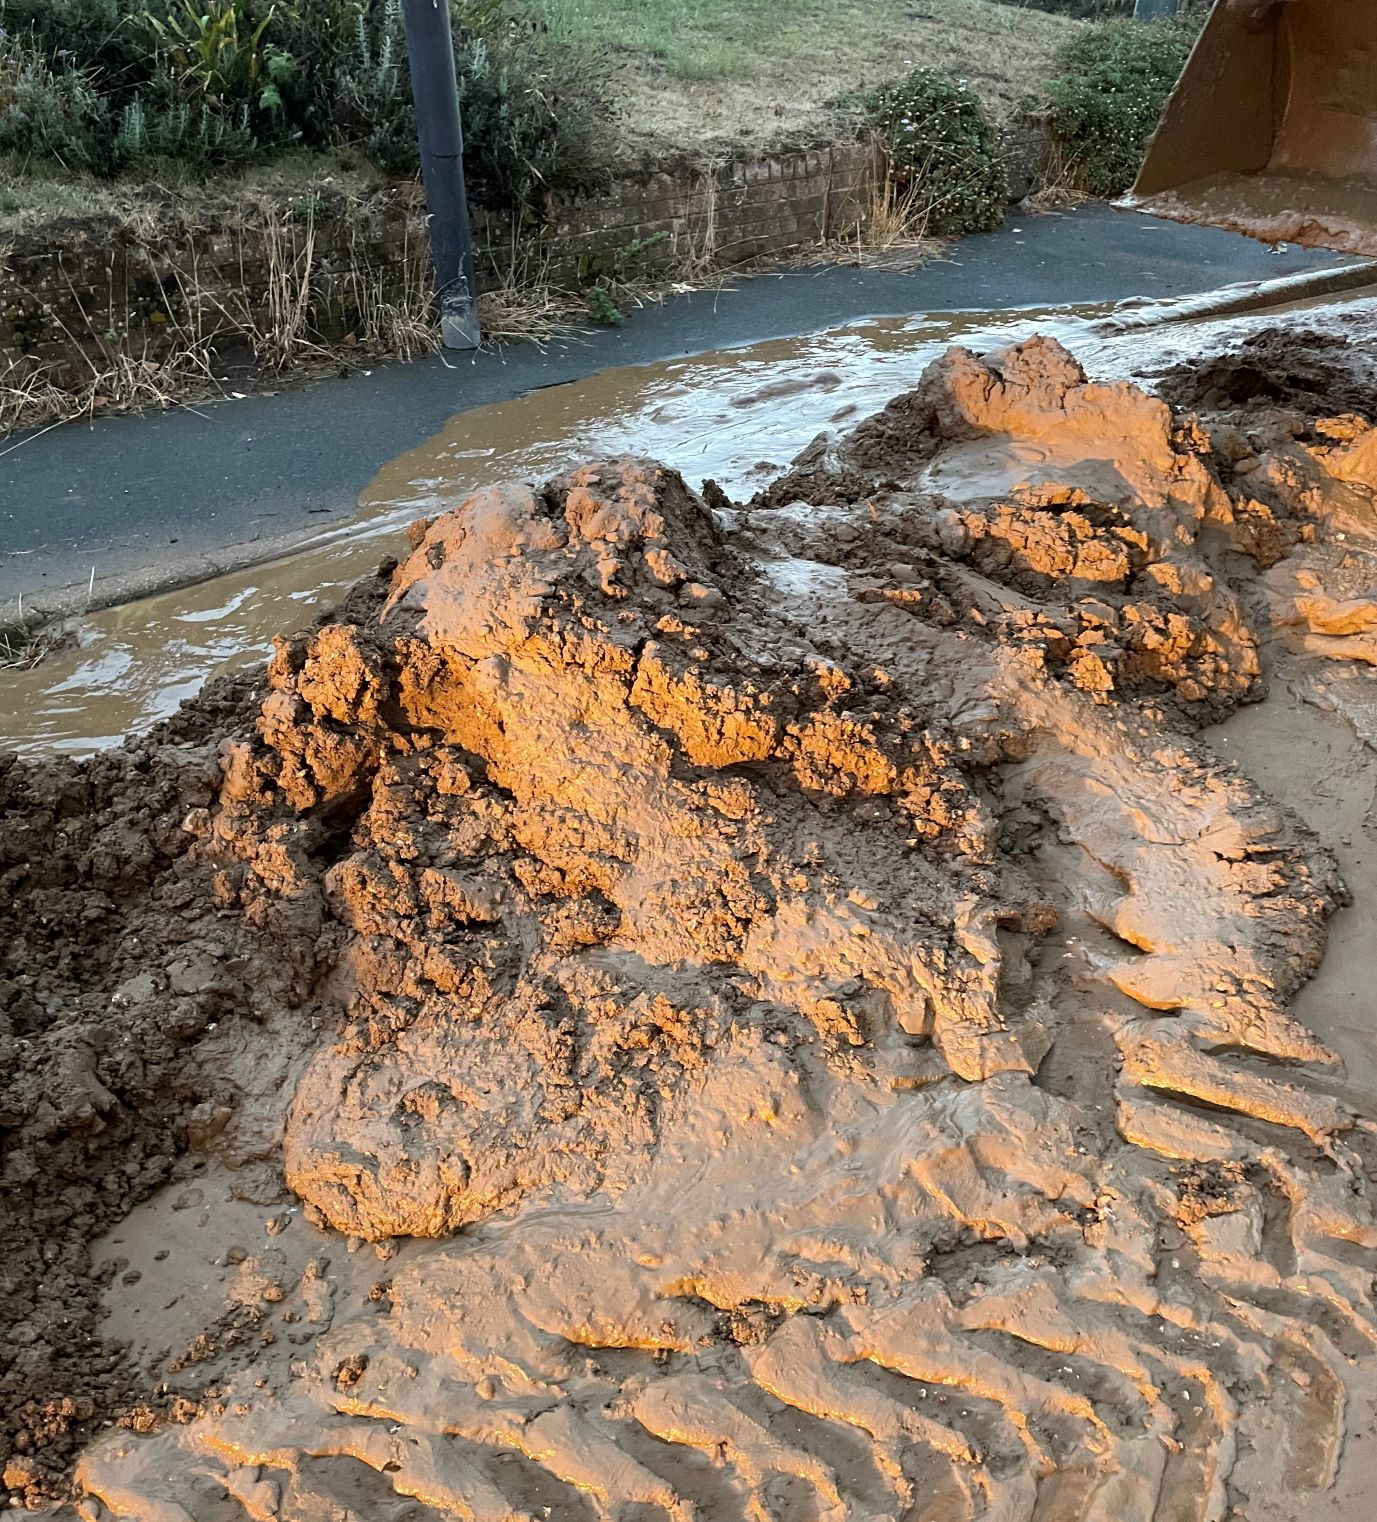 Mud on the highway during recent flooding in Arreton